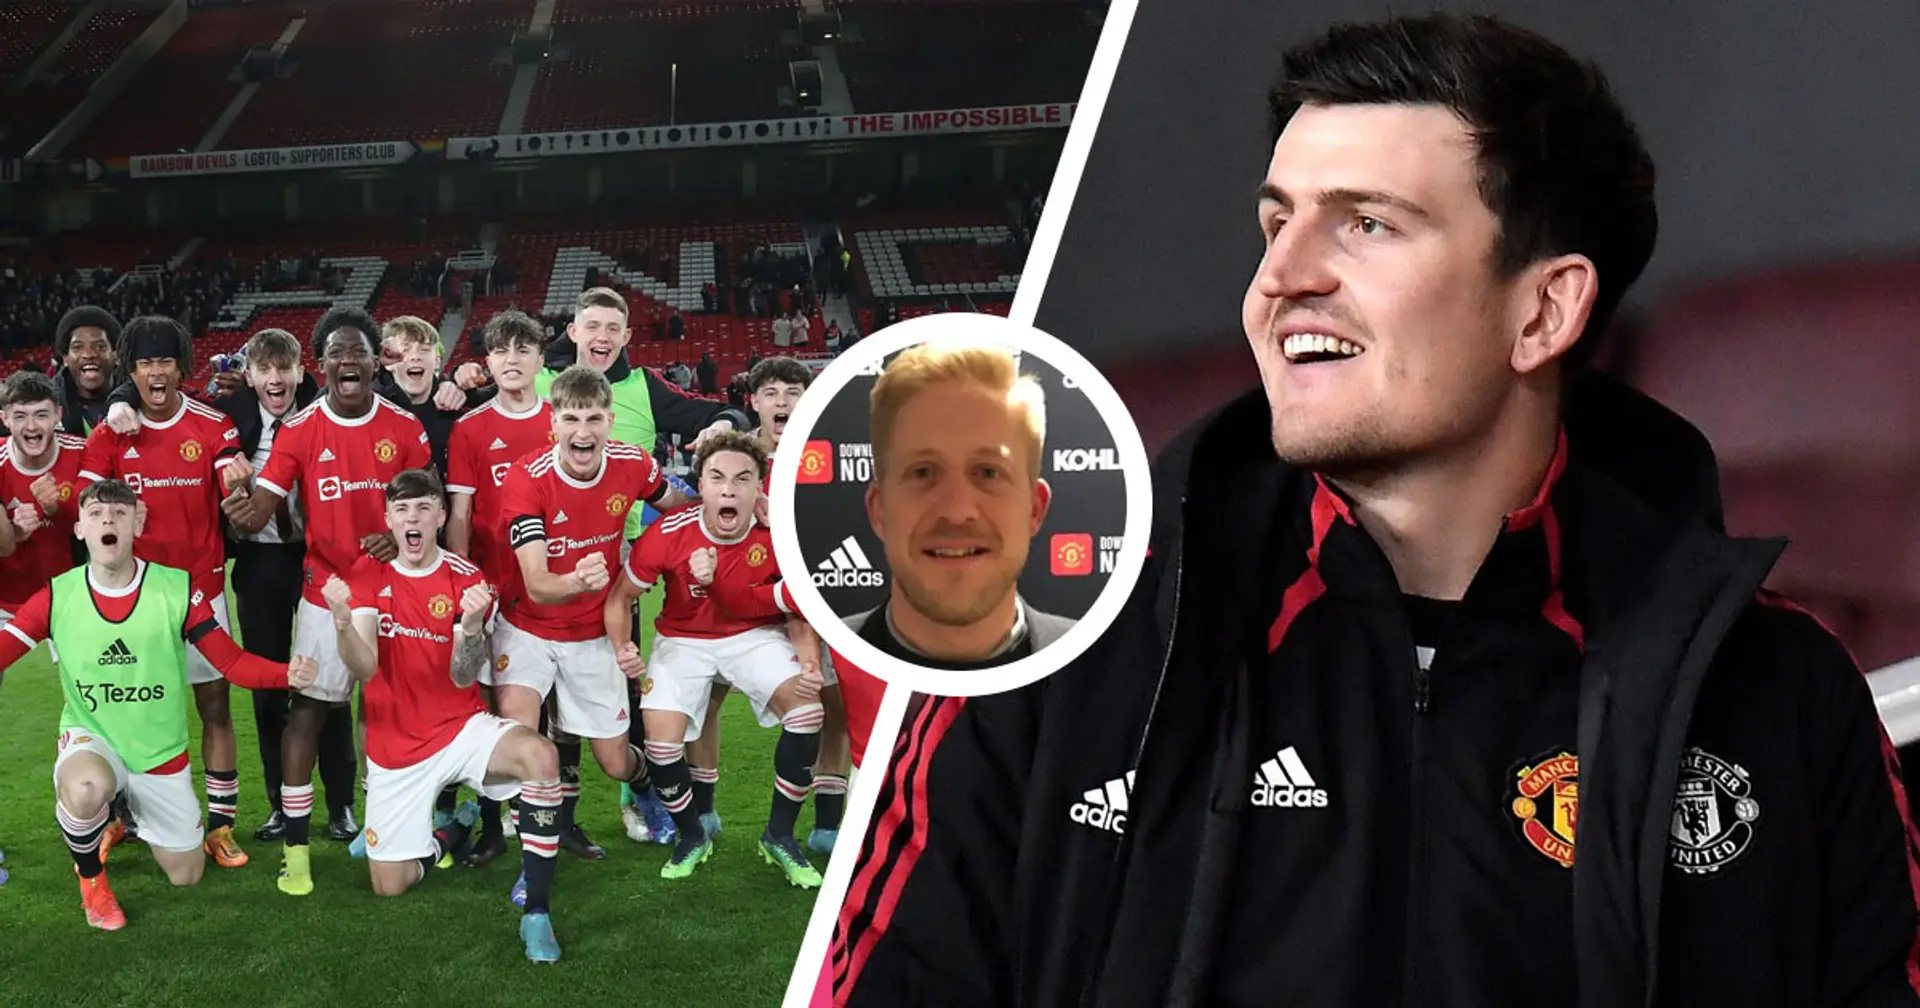 ‘He’s got a keen interest’: Man United youth coach explains how Maguire inspired U18 side before FA Youth Cup semi-finals win